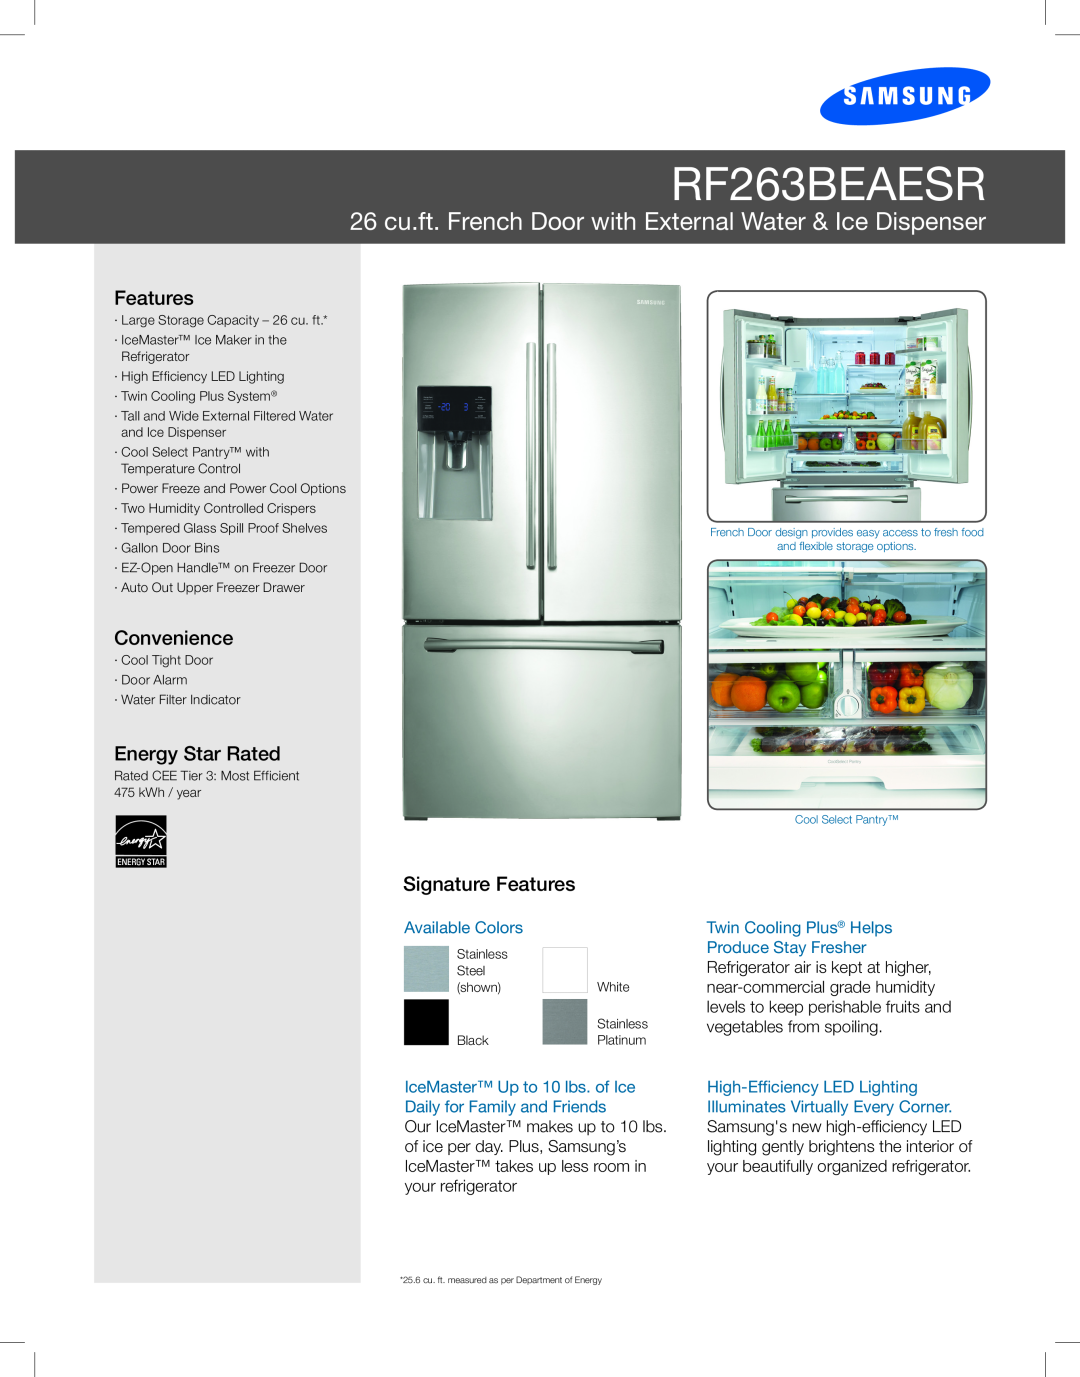 Samsung RF263BEAEBC user manual Refrigerator, imagine the possibilities, Thank you for purchasing this Samsung product 